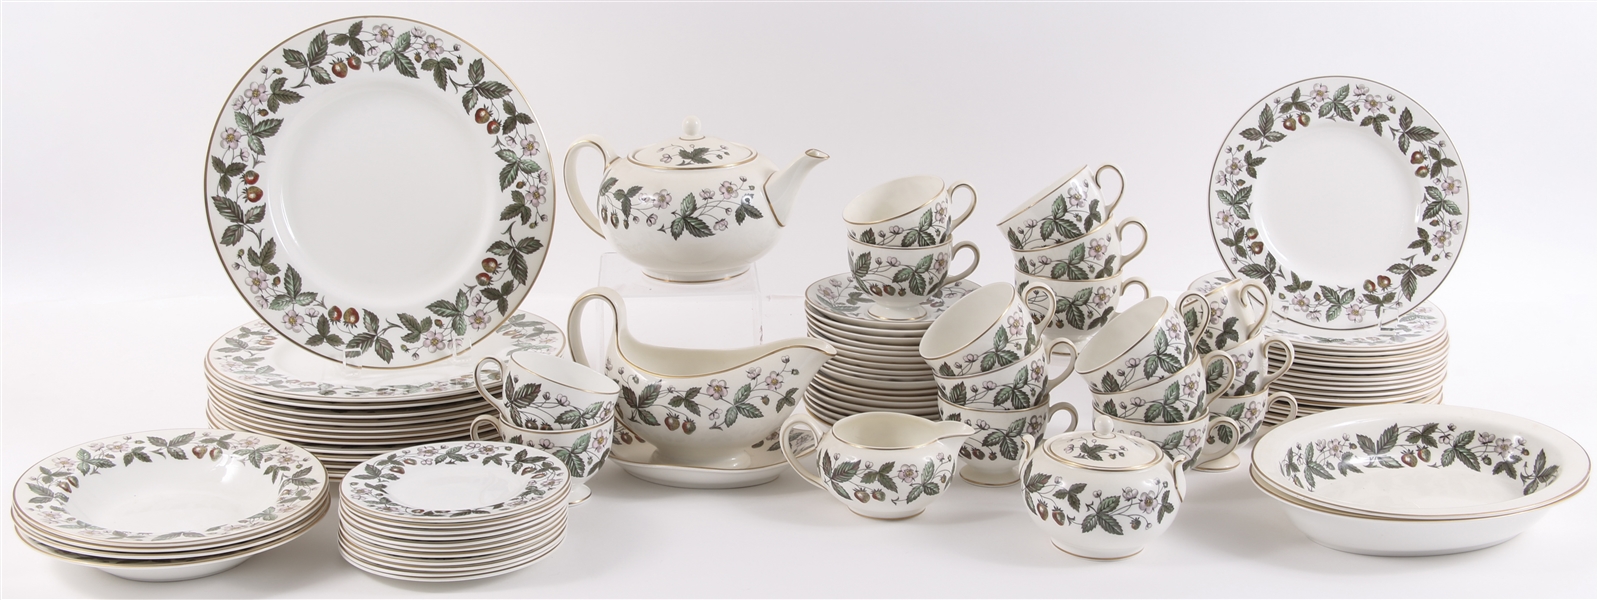 WEDGWOOD STRAWBERRY HILL DINNER SERVICE - LOT OF 86